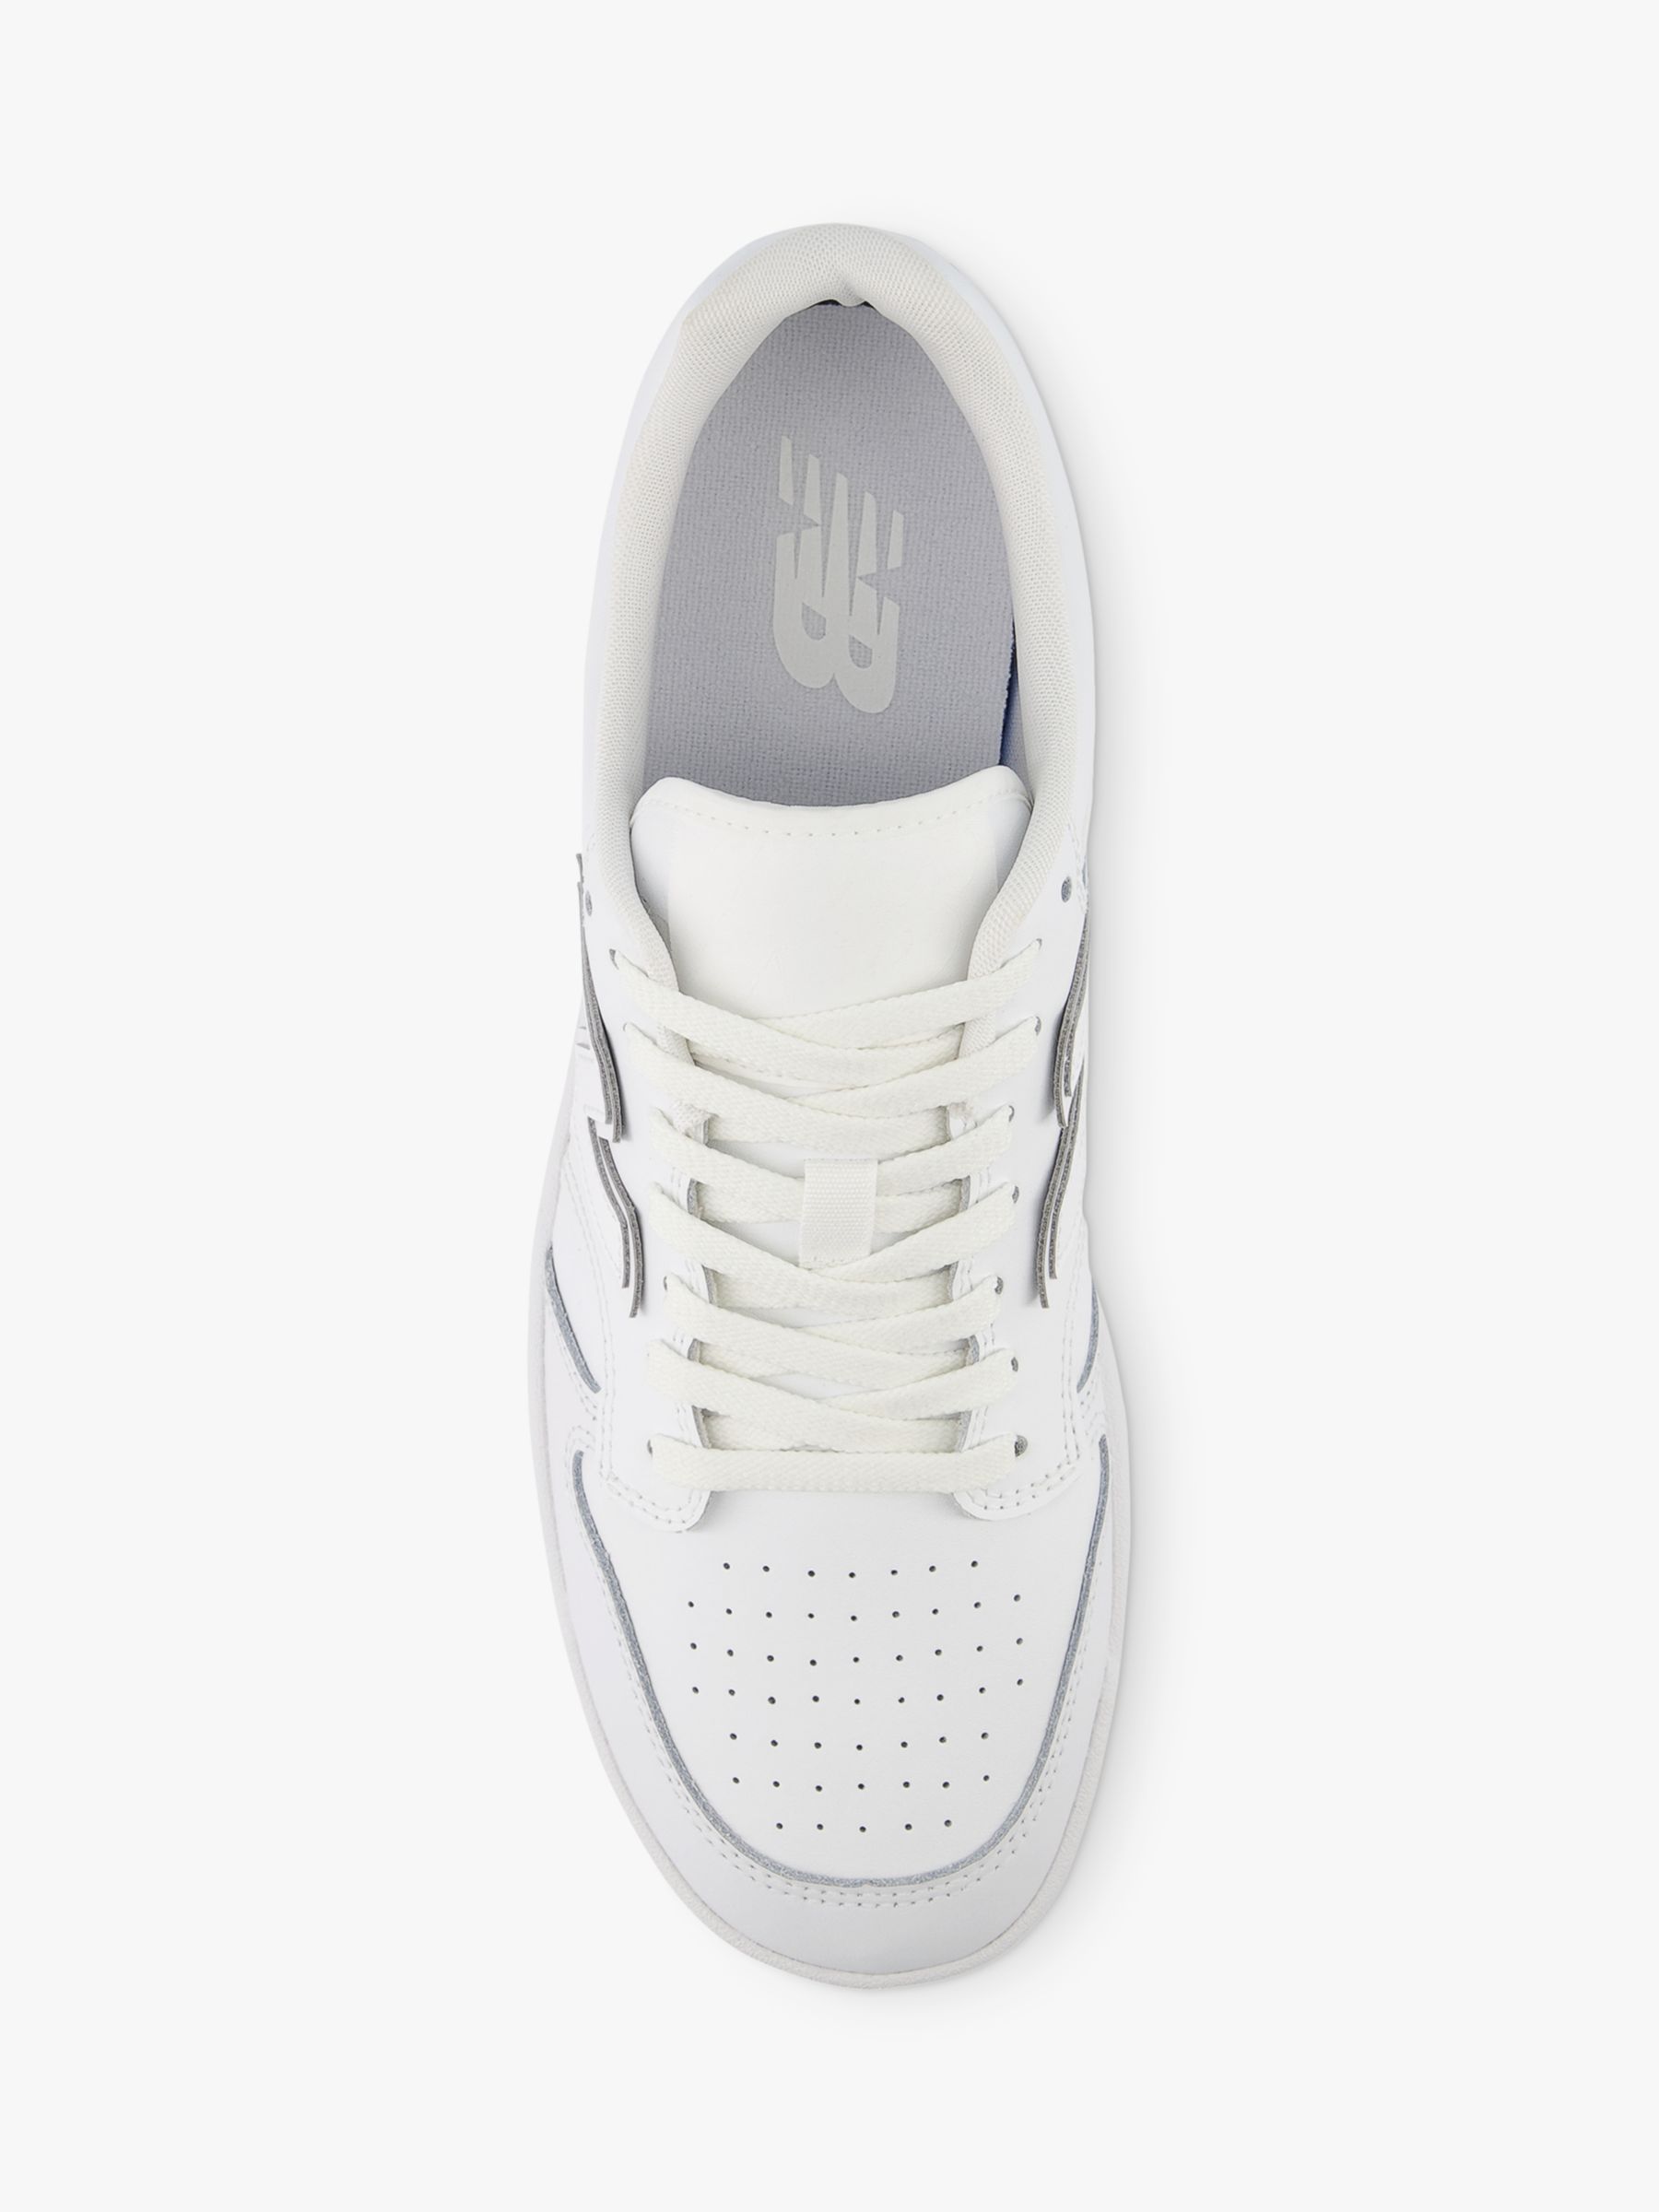 New Balance 480 Leather Lace Up Trainers, White at John Lewis & Partners